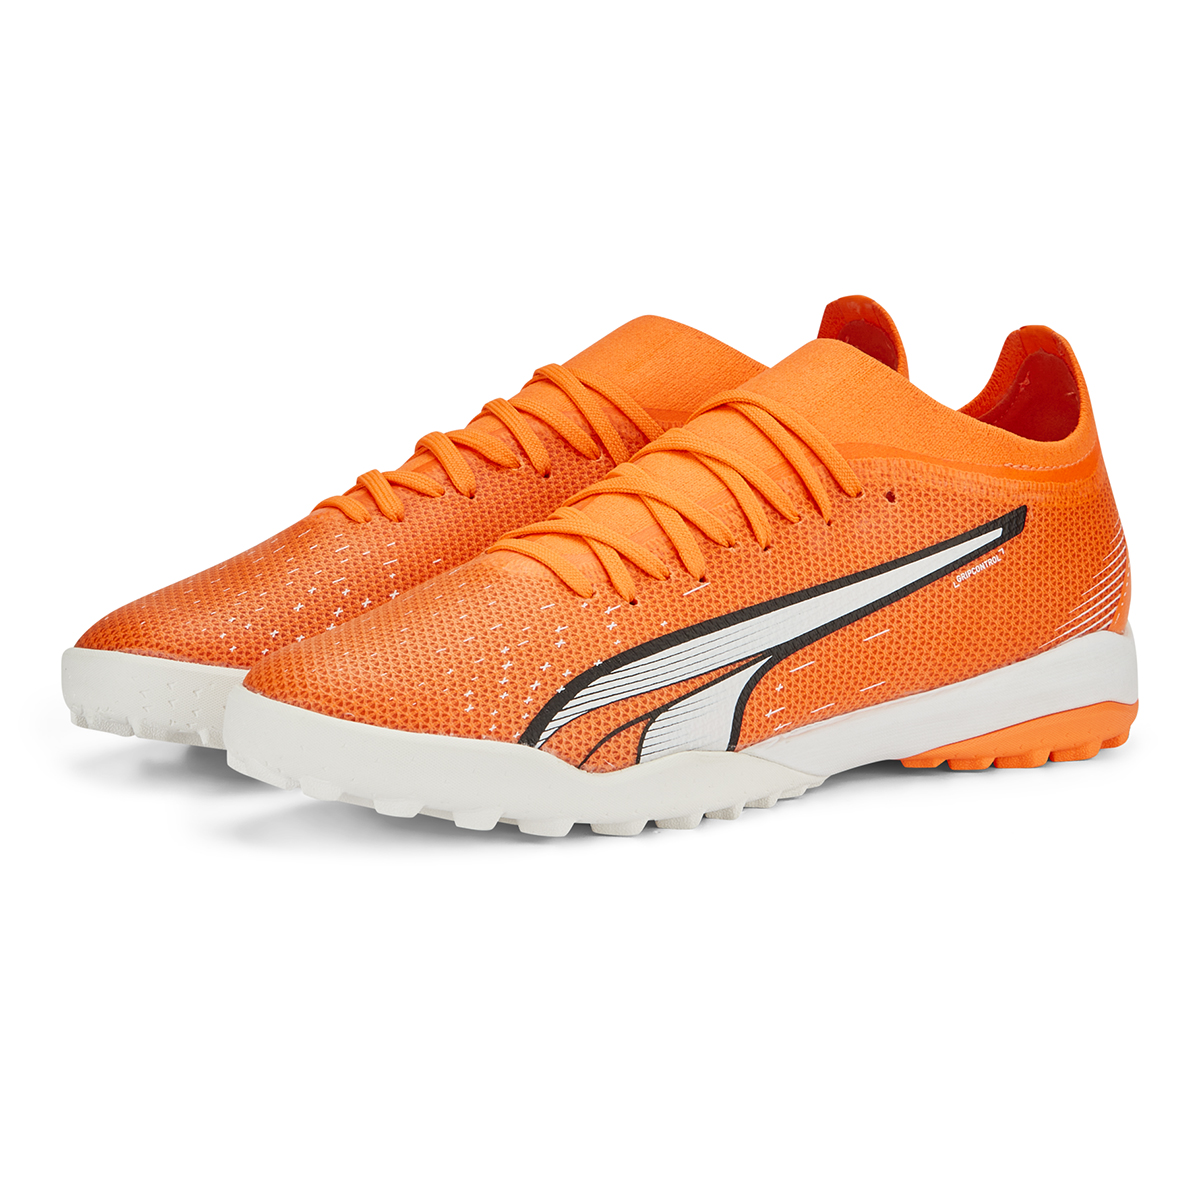 Botines Fútbol Puma Ultra Match Hombre,  image number null